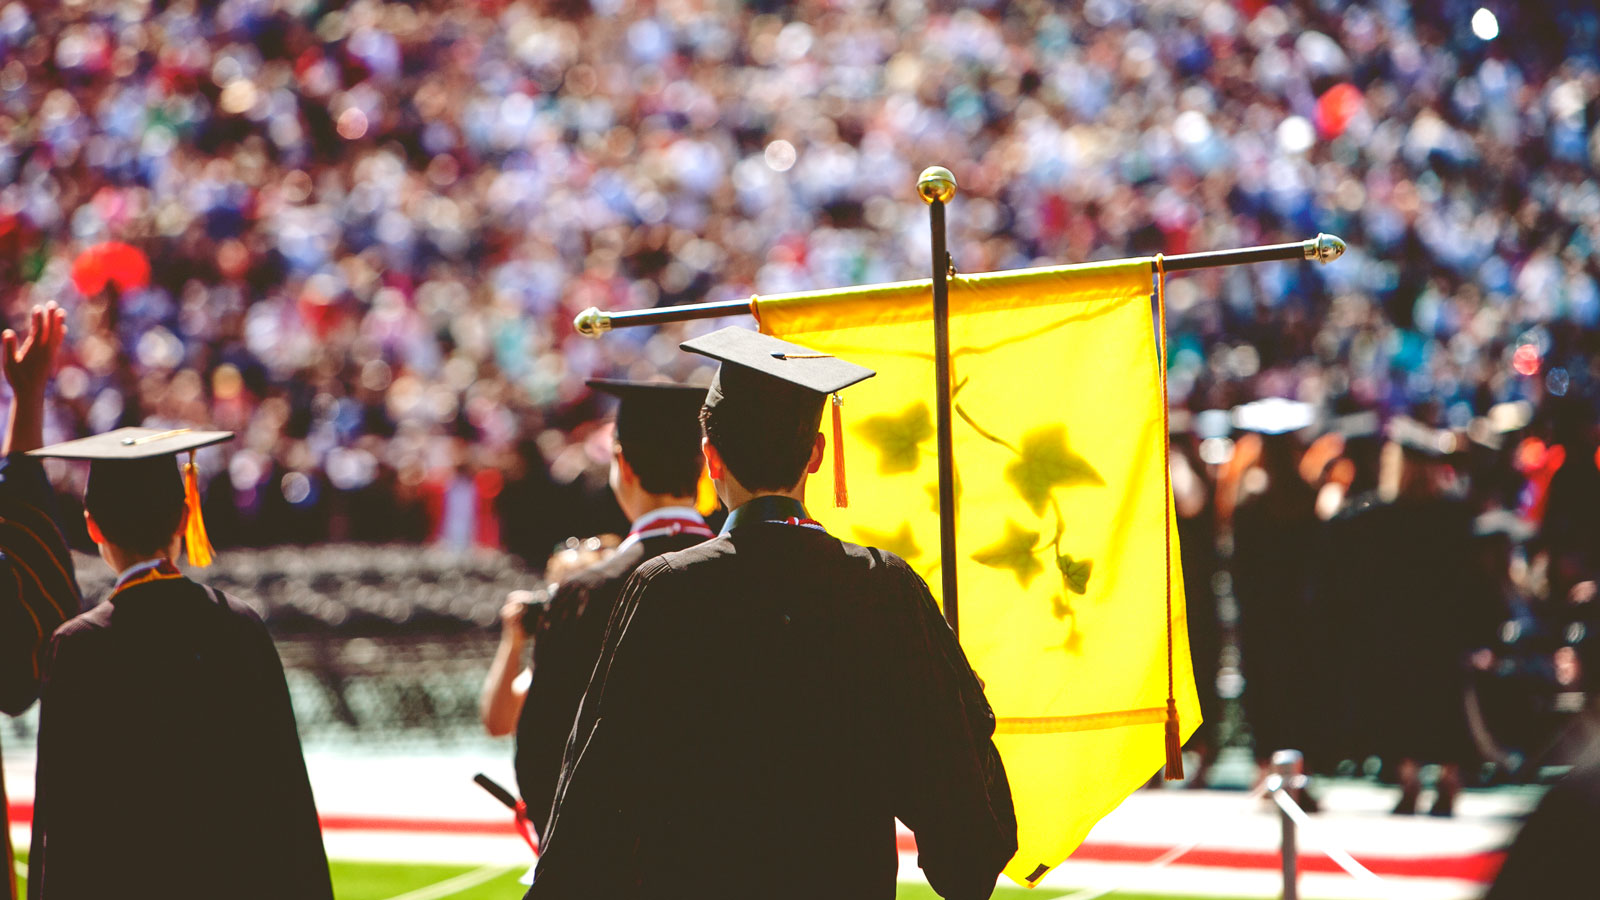 A banner being held at Commencement